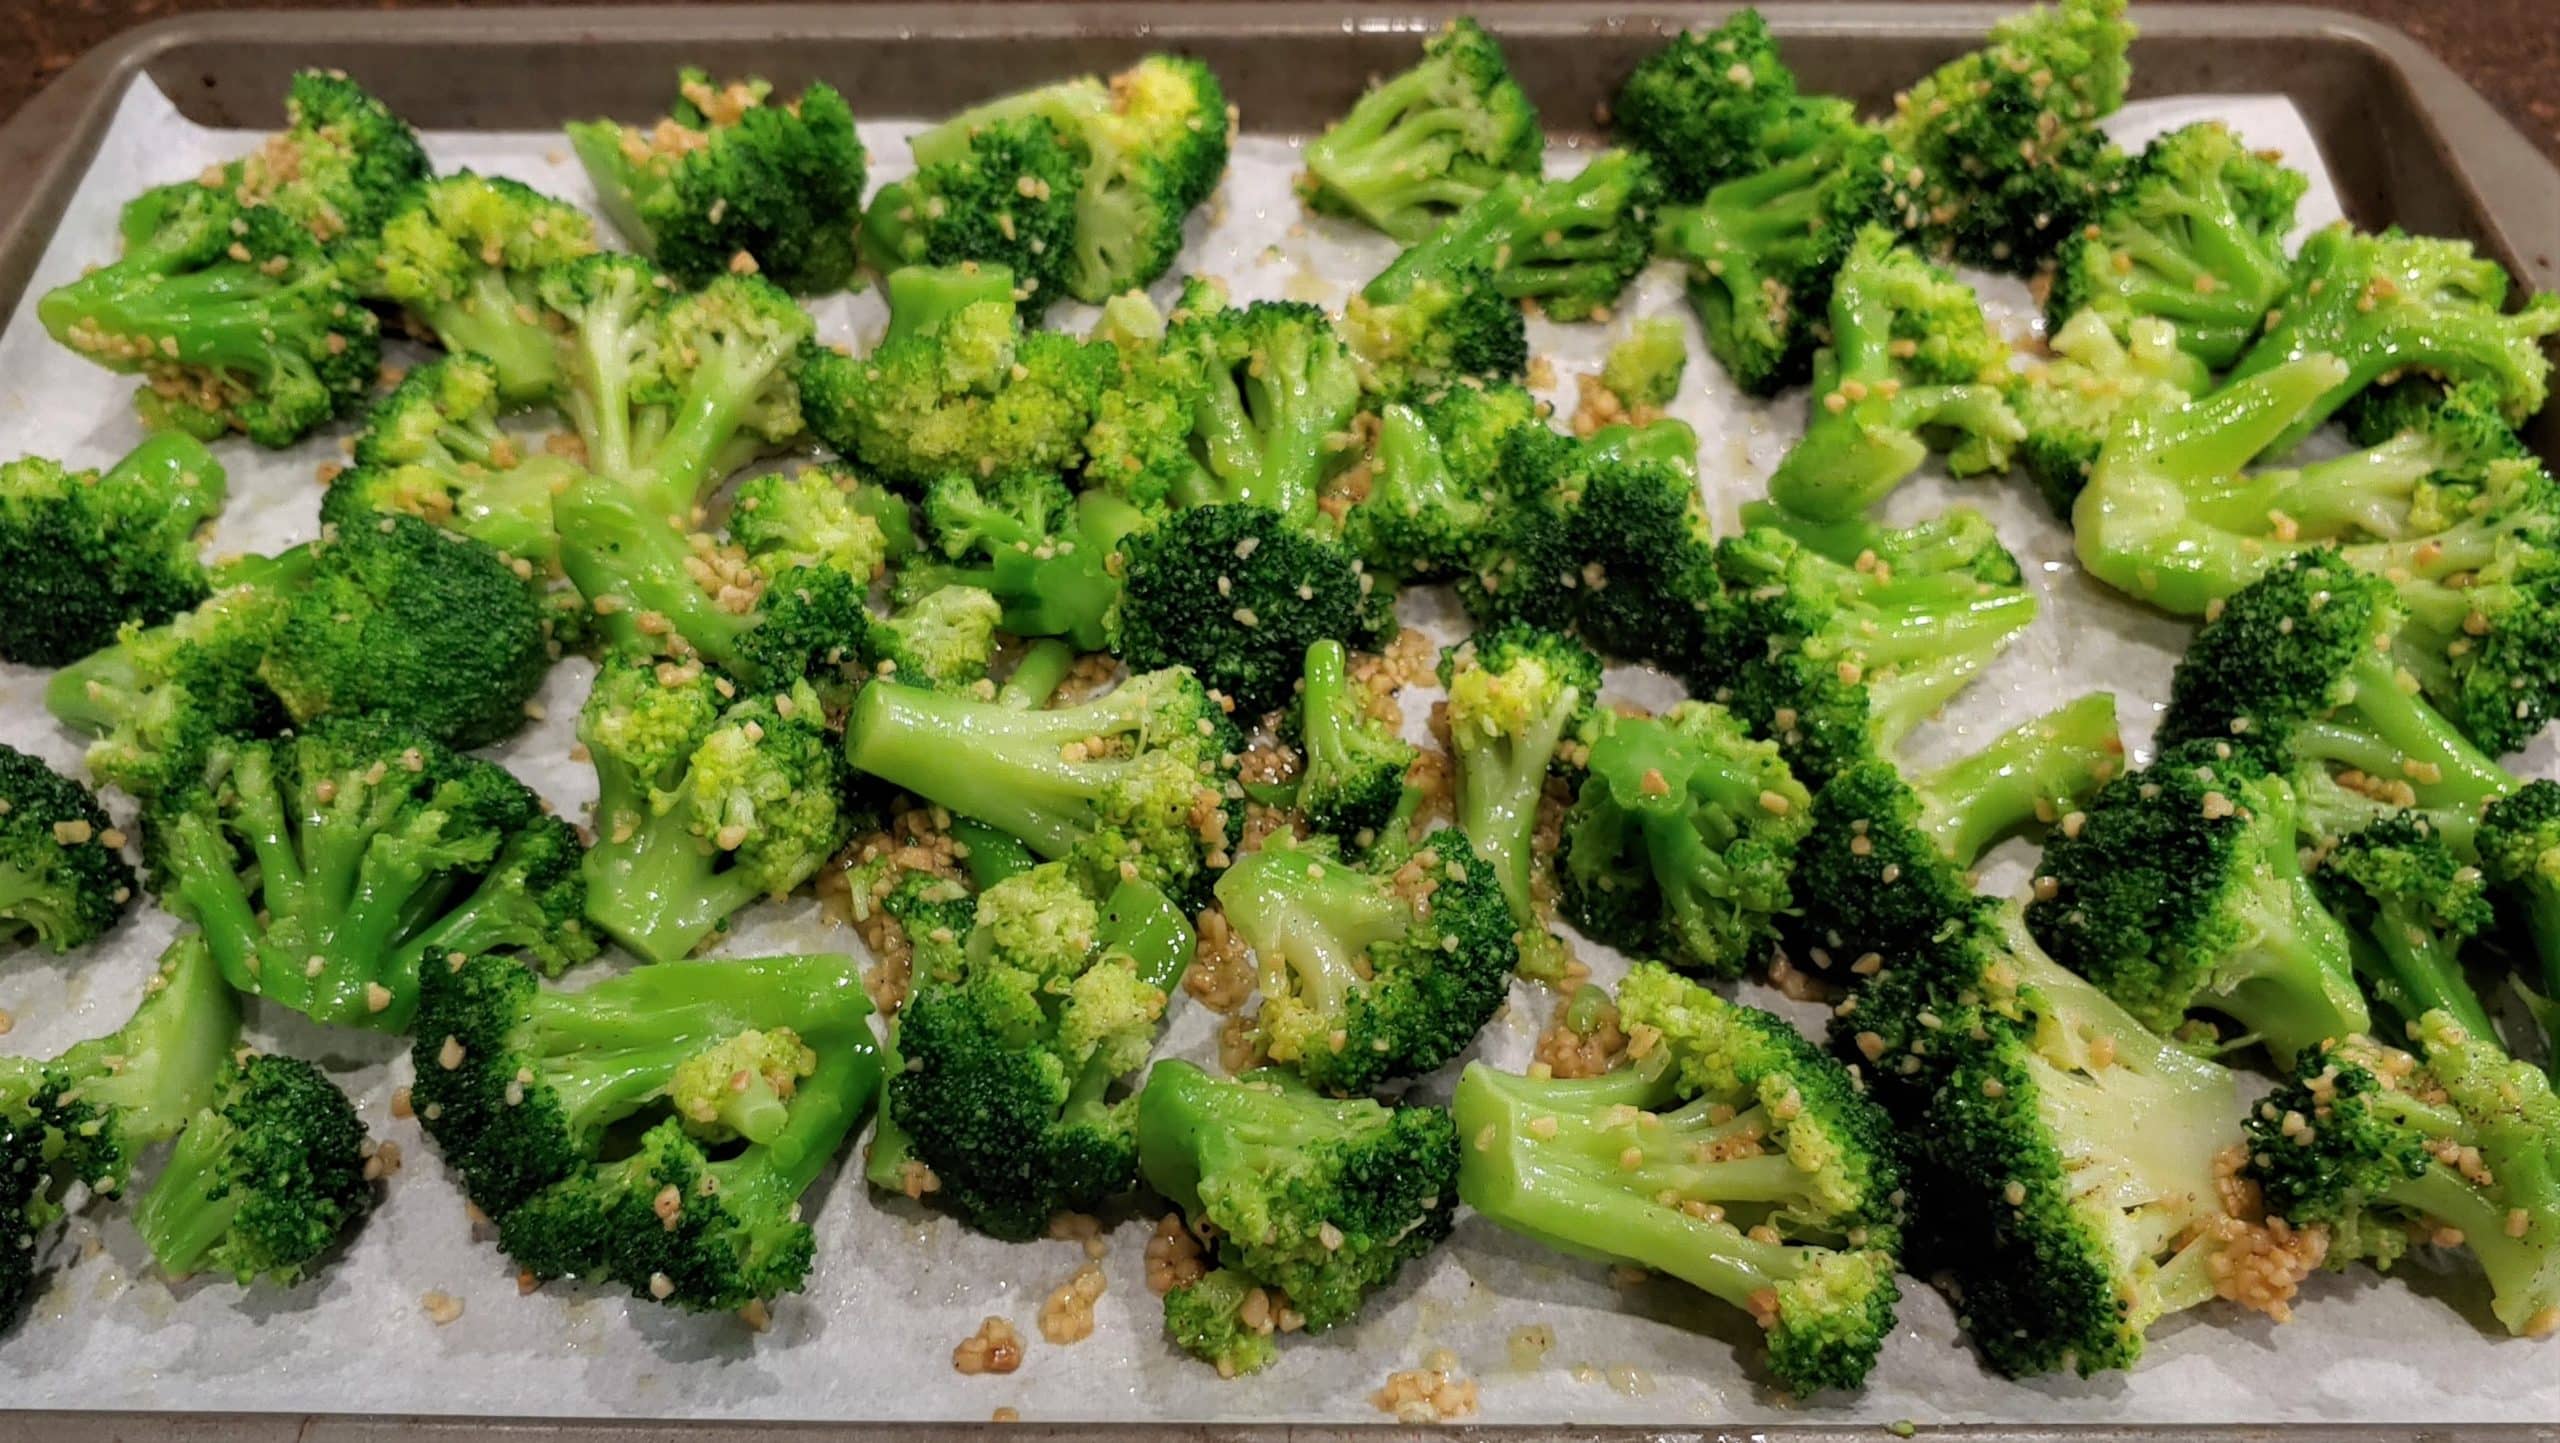 Roasted Broccoli with cheese - Dining in with Danielle